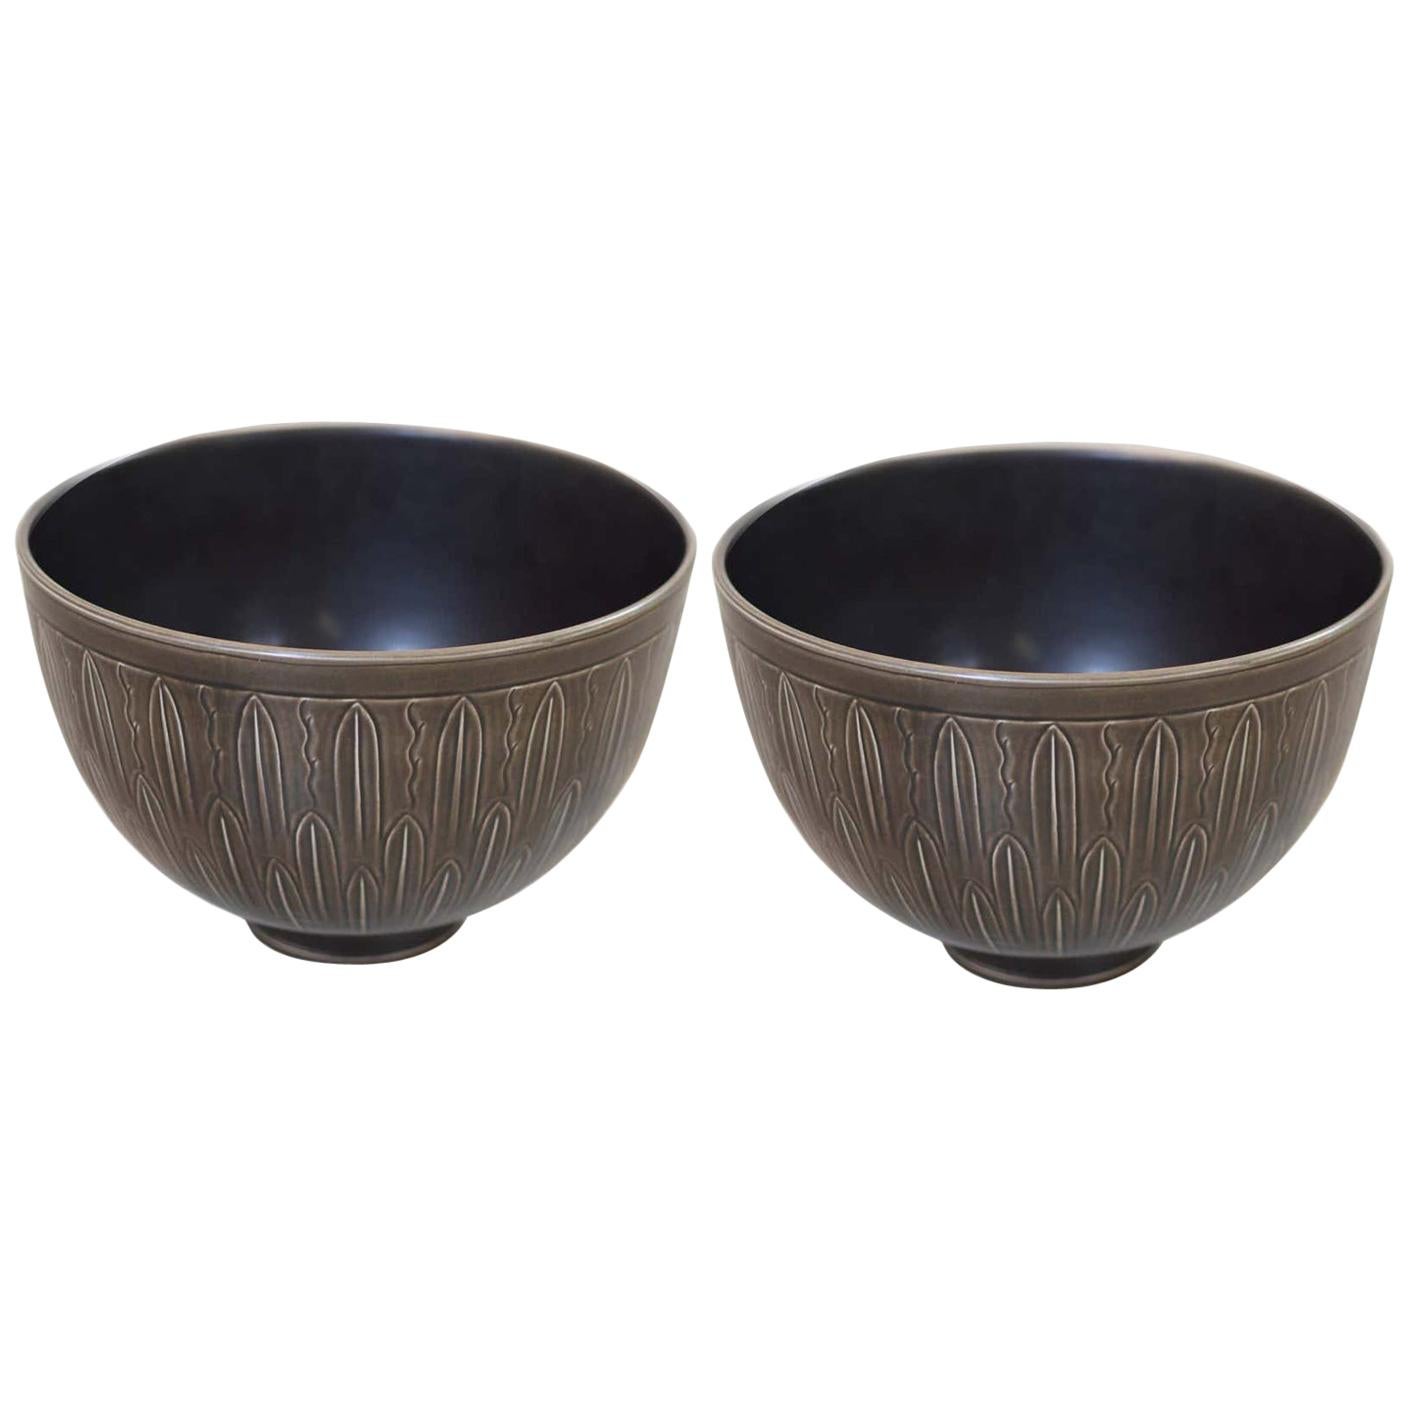 Two Very Large 1930s 'Solbjerg' Fruit Bowl by Nils Johan Thorsson for Aluminia For Sale